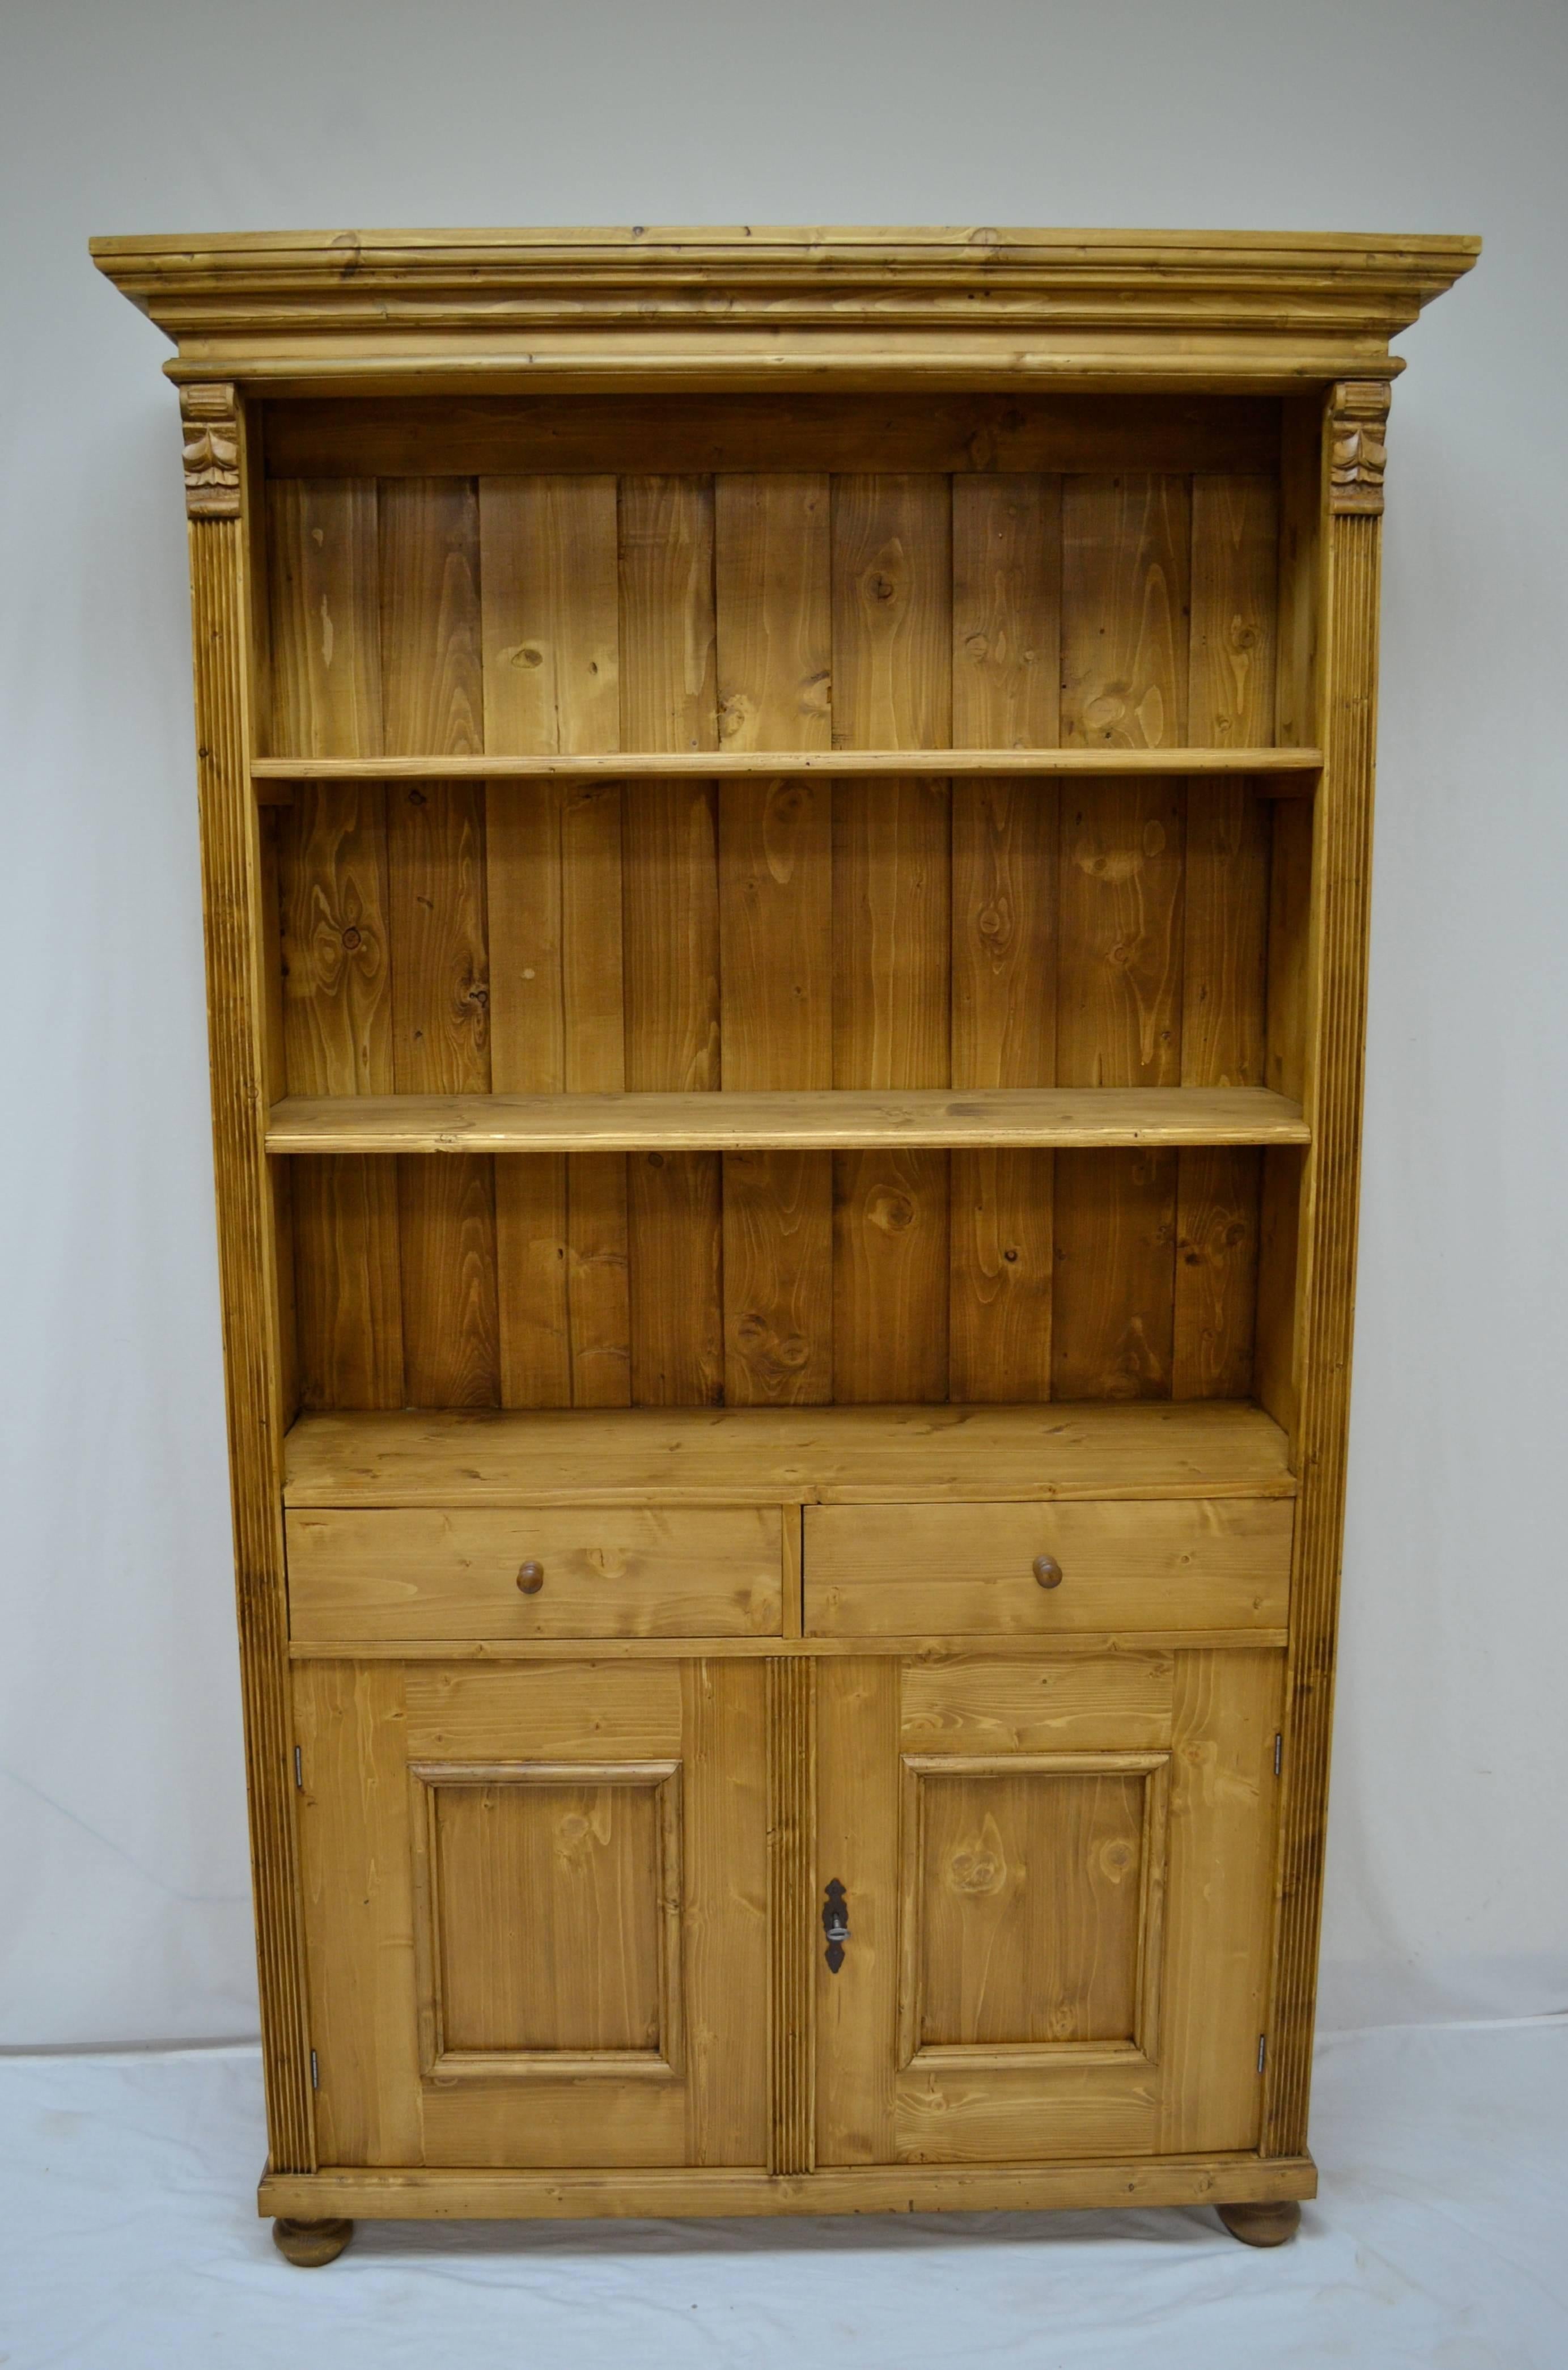 Antique pine bookcases can be hard to find and so can well-made reproductions. Using design features and methods of construction from our antique pine furniture, our workshop in Europe takes lightly-used reclaimed pine and fashions our reproduction